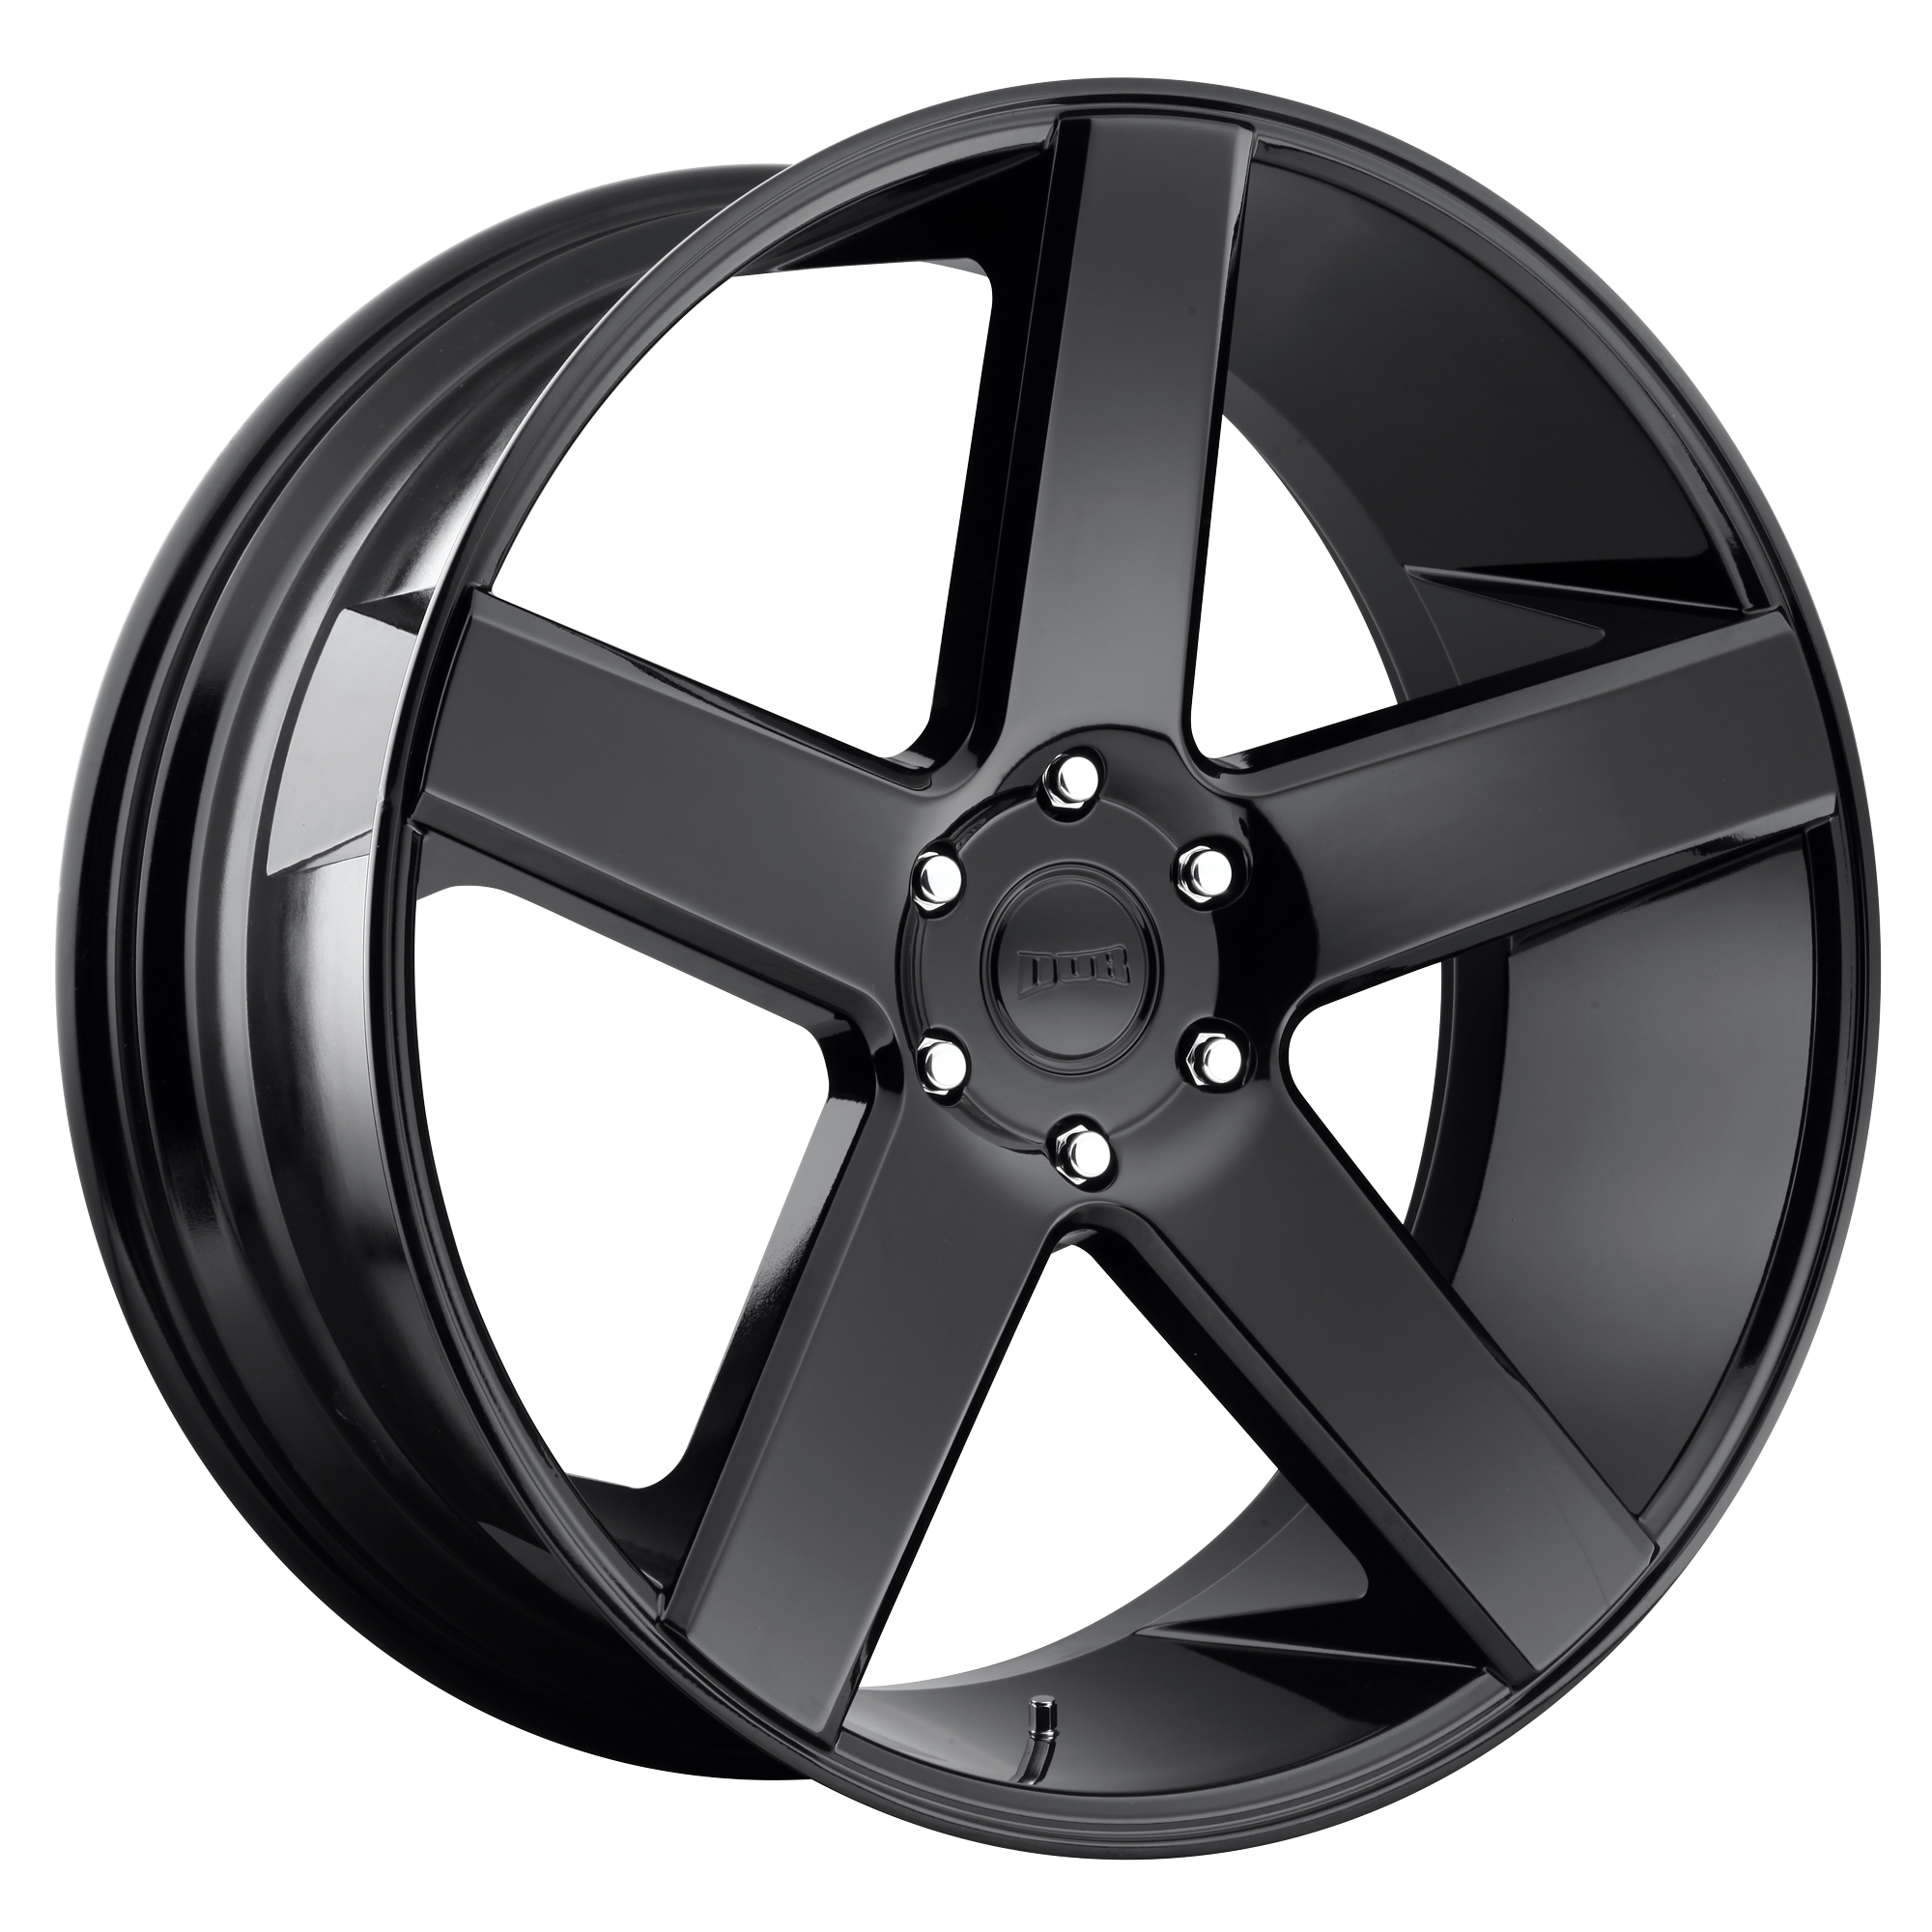 BALLER 22x9.5 6x139.70 GLOSS BLACK (31 mm) - Tires and Engine Performance